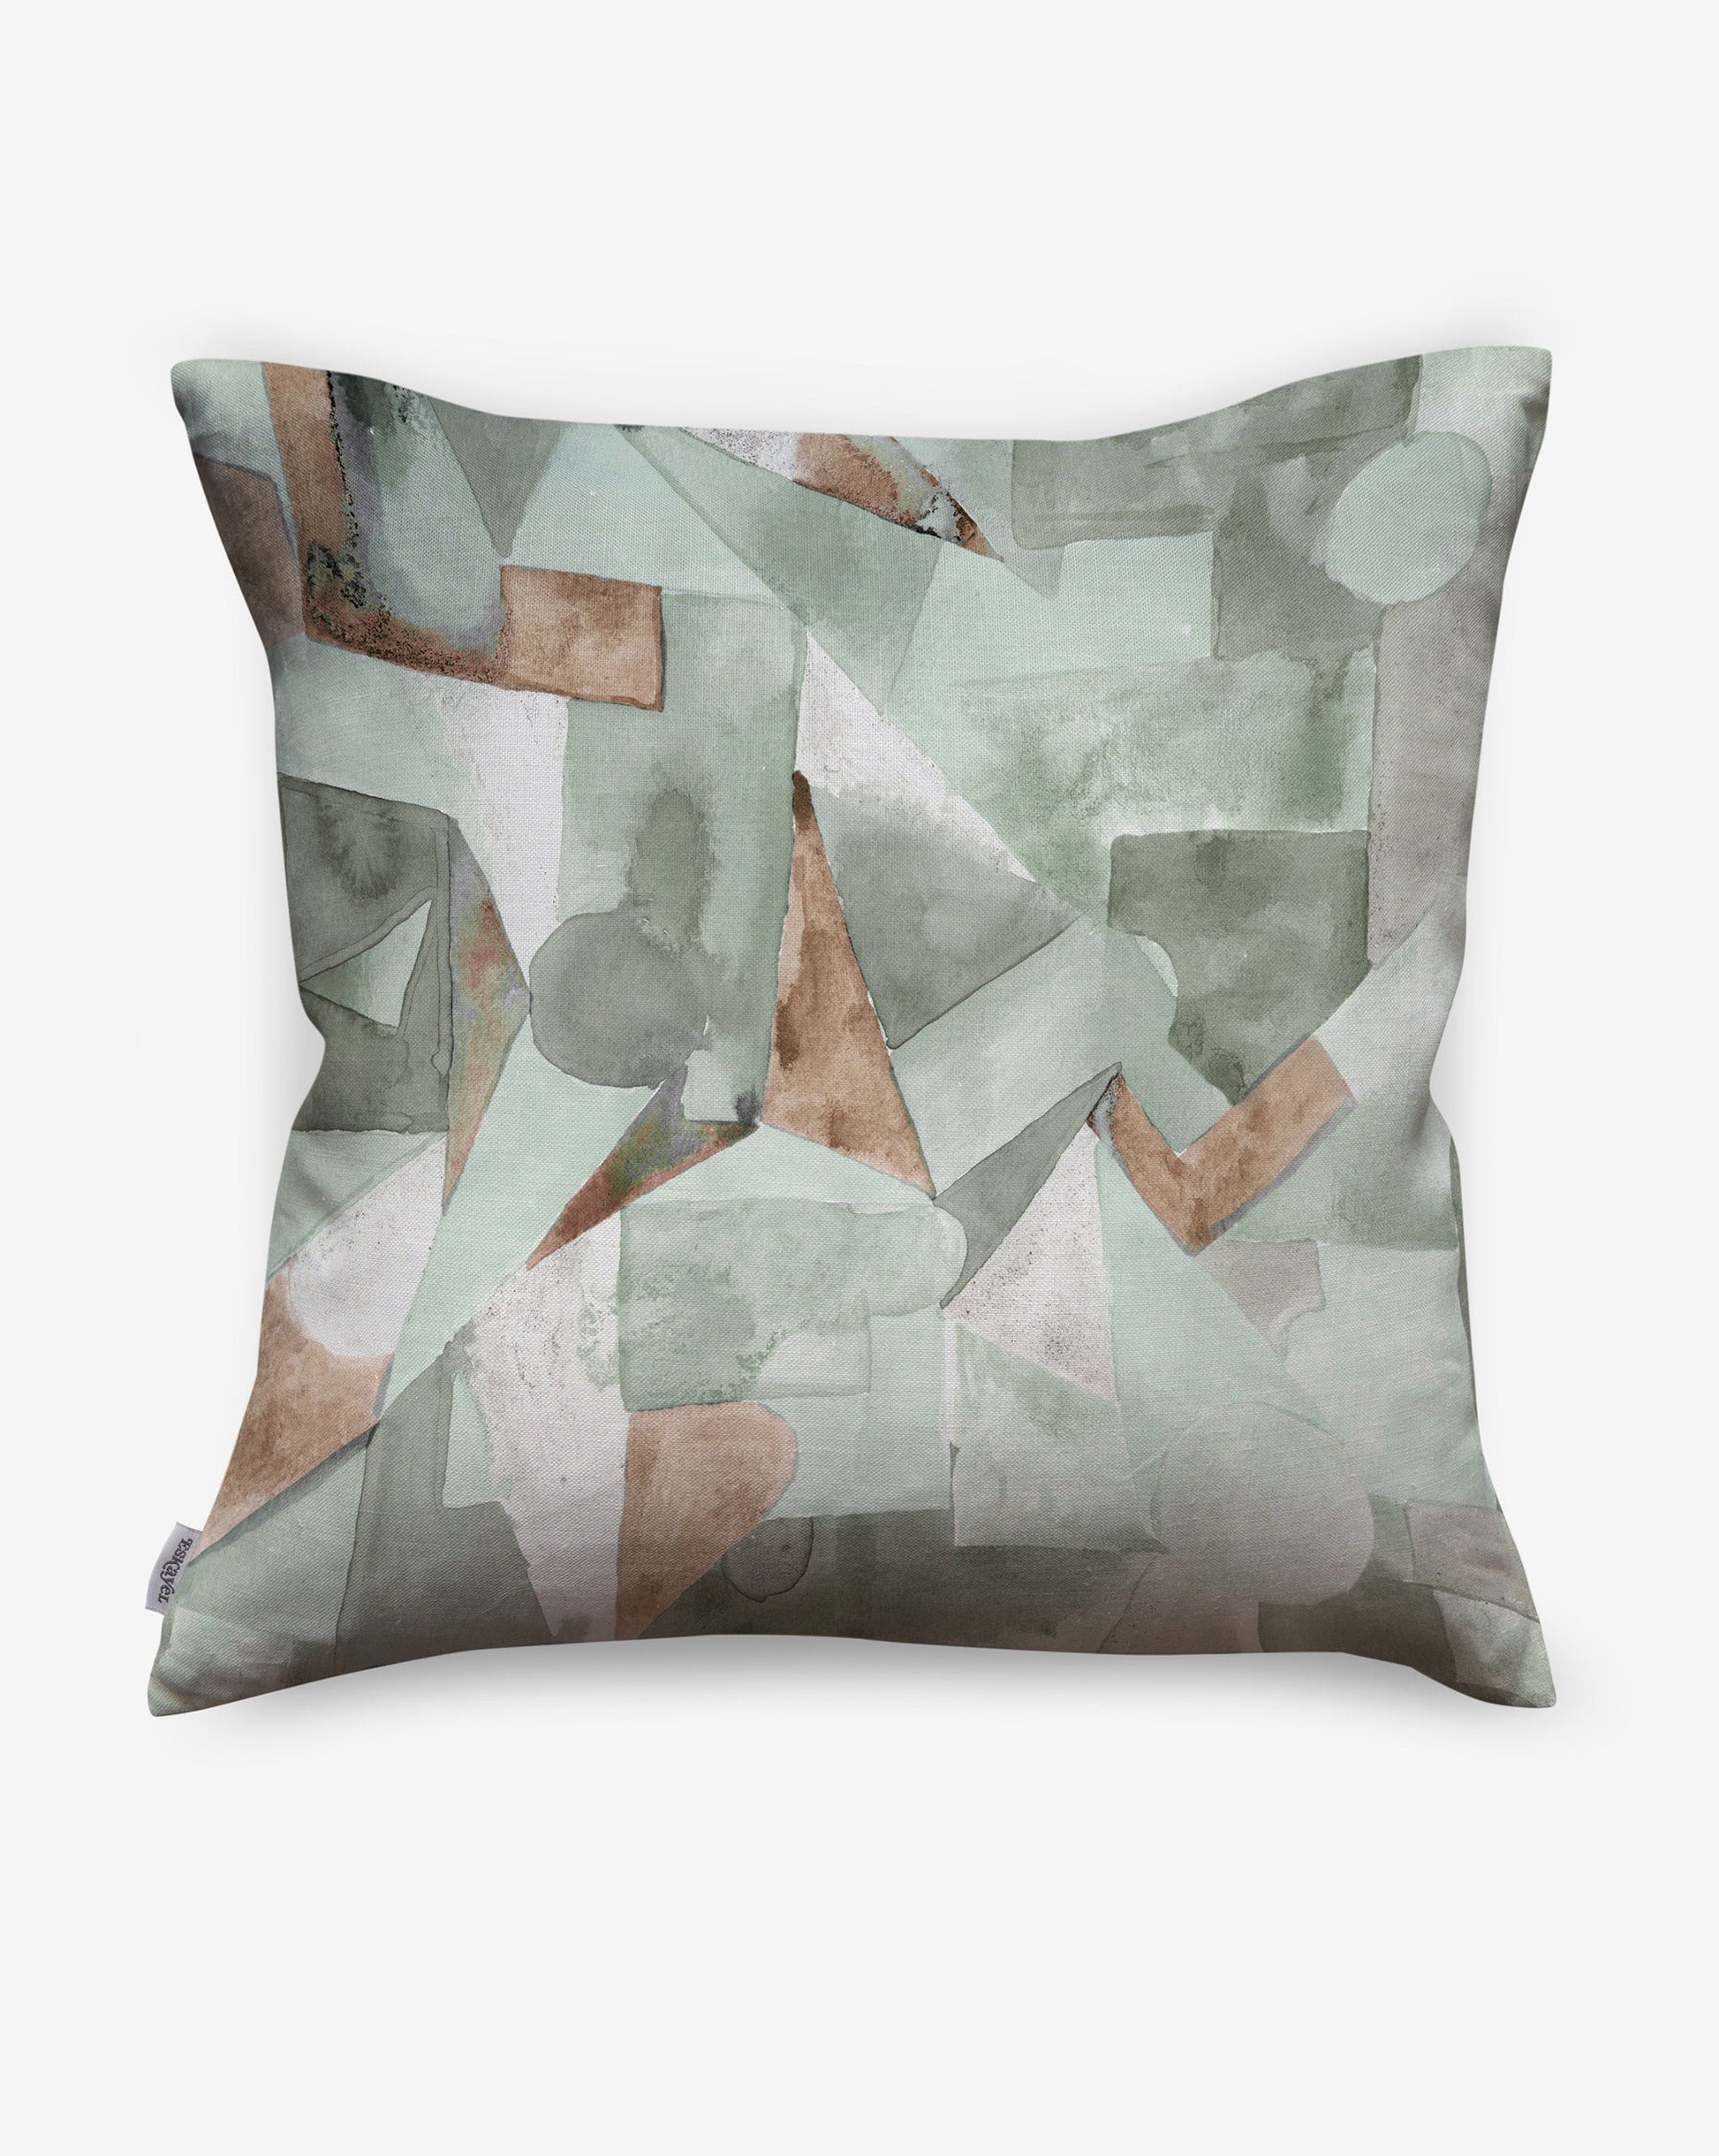 In Pieces pillows in Tourmaline, green blocks of pigment depict puzzle pieces.  